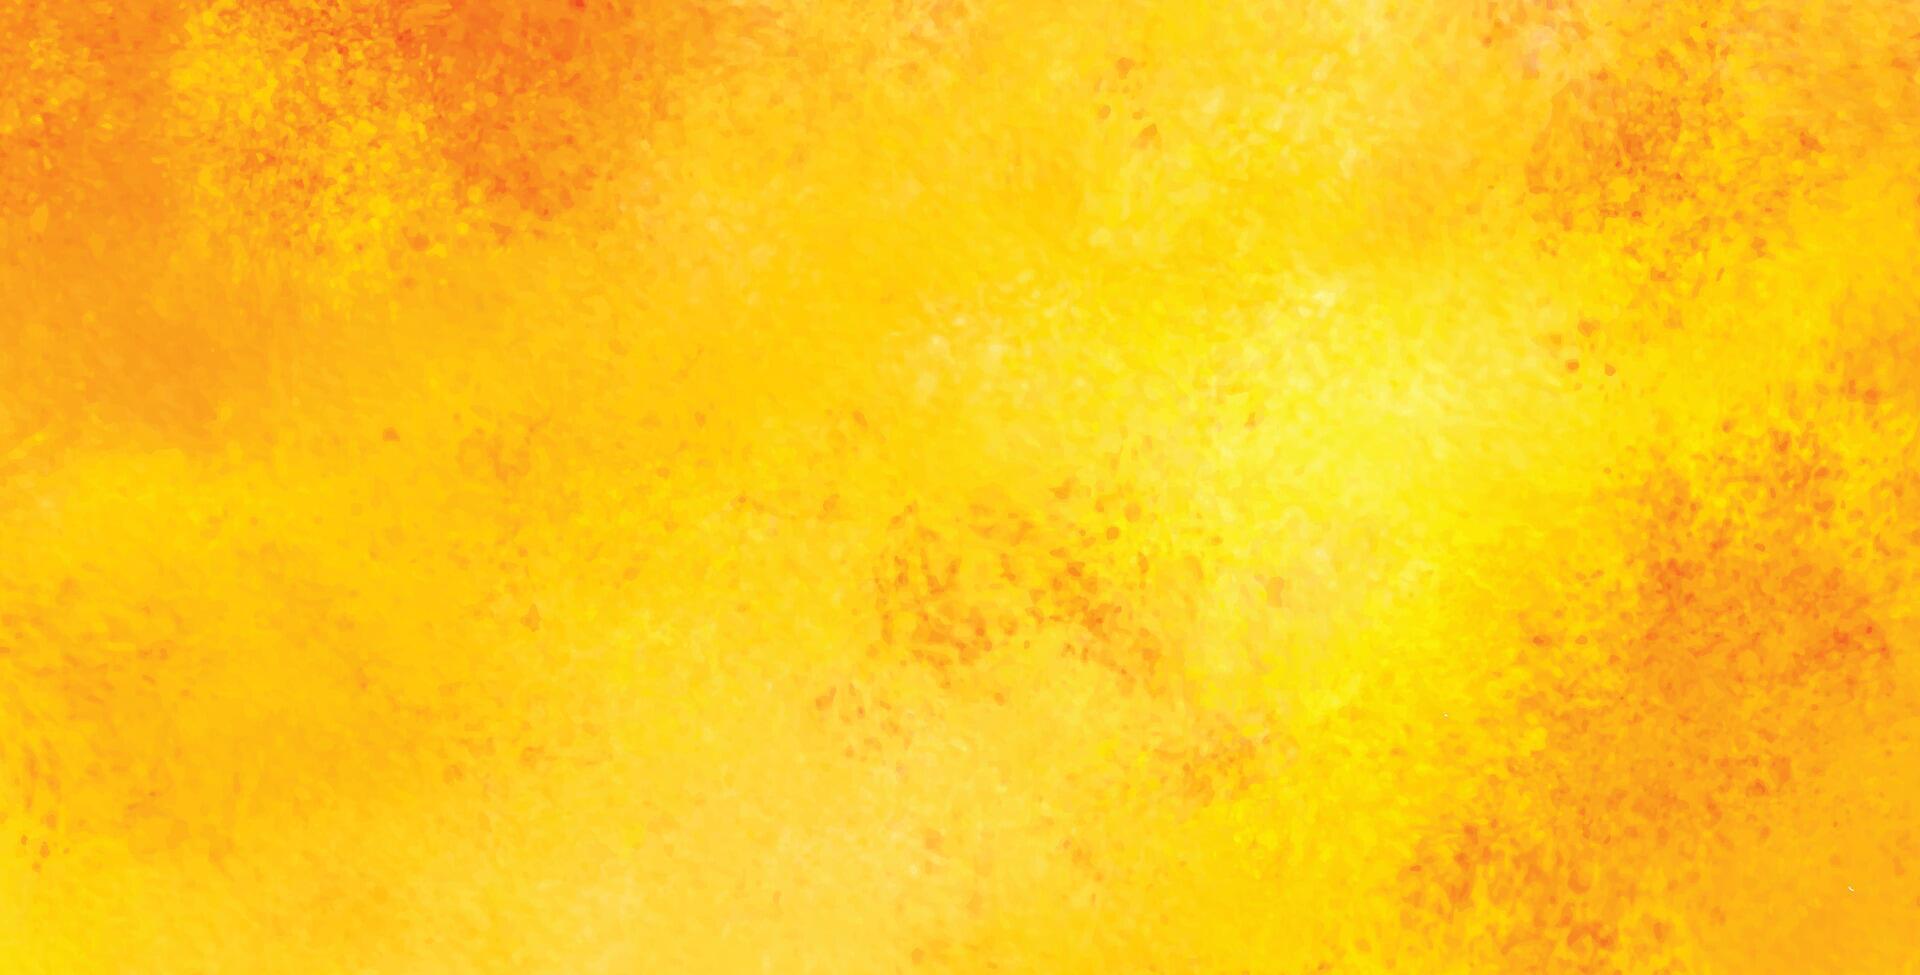 abstract background of watercolor in orange yellow color vector